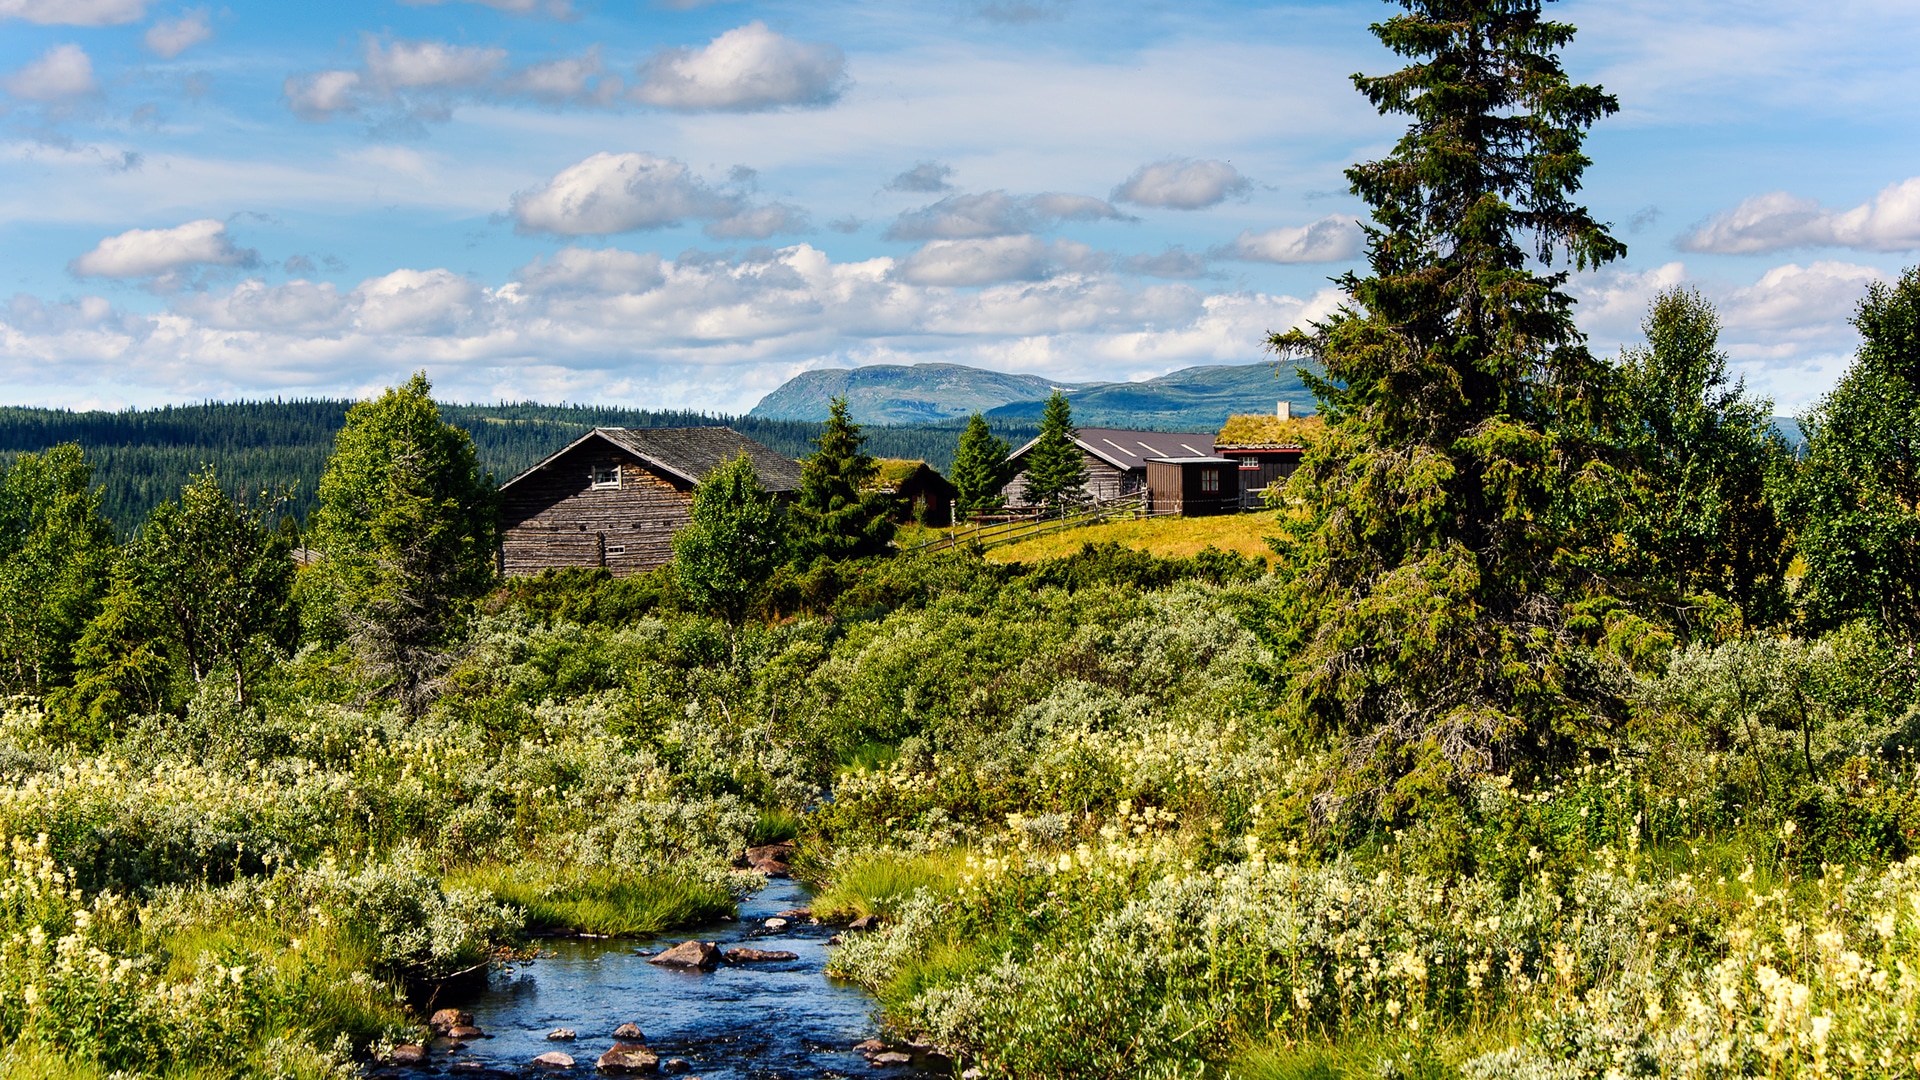 A stream flows in front of traditional Norwegian wooden houses on a sunny summer day with mountains in the distance.